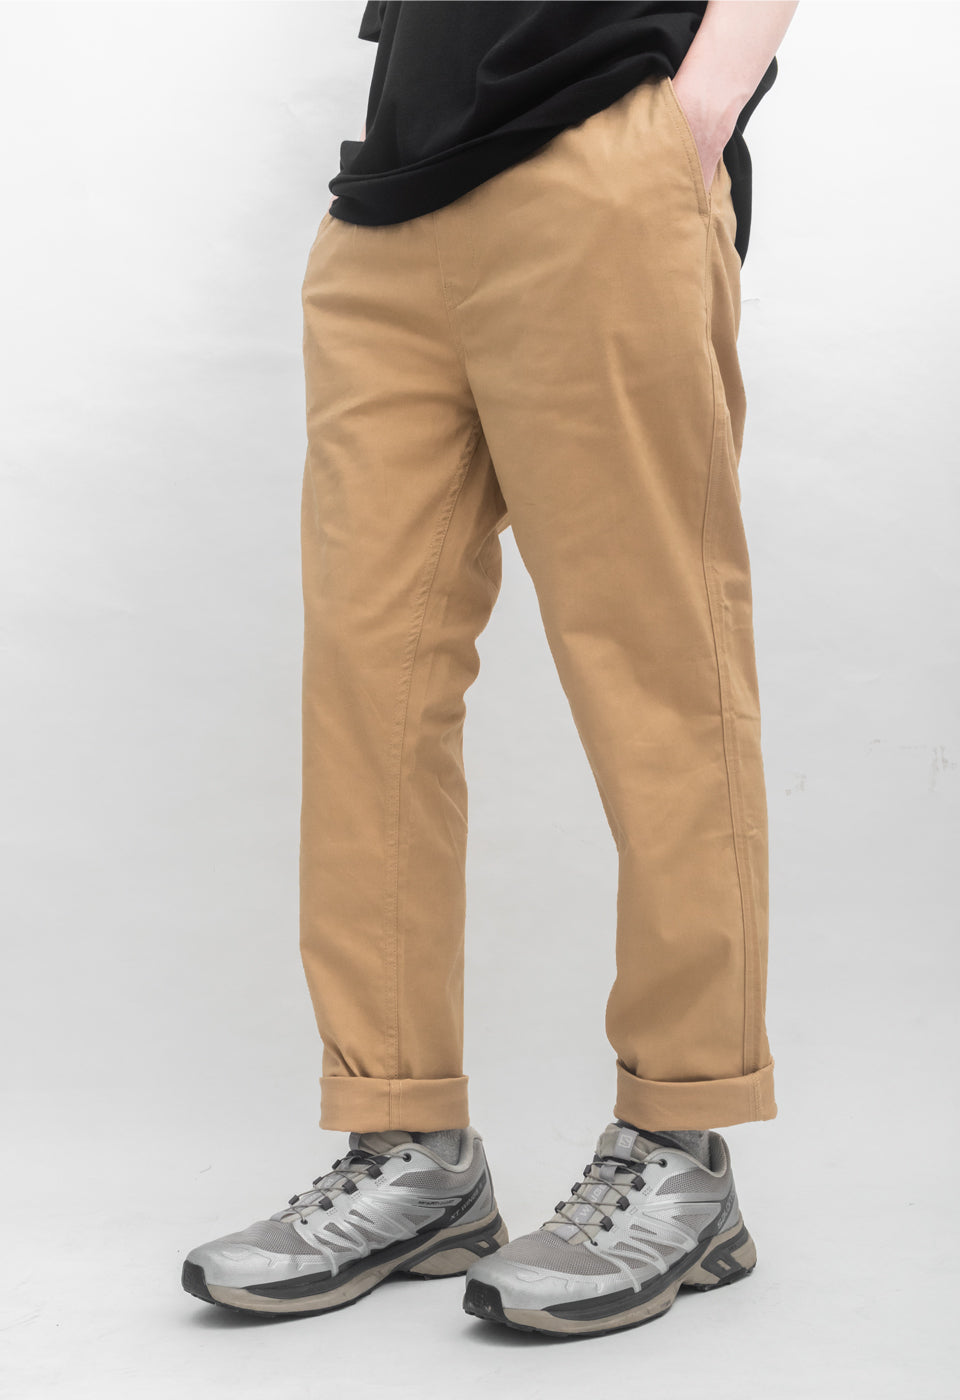 RELAXED CHINO PANTS